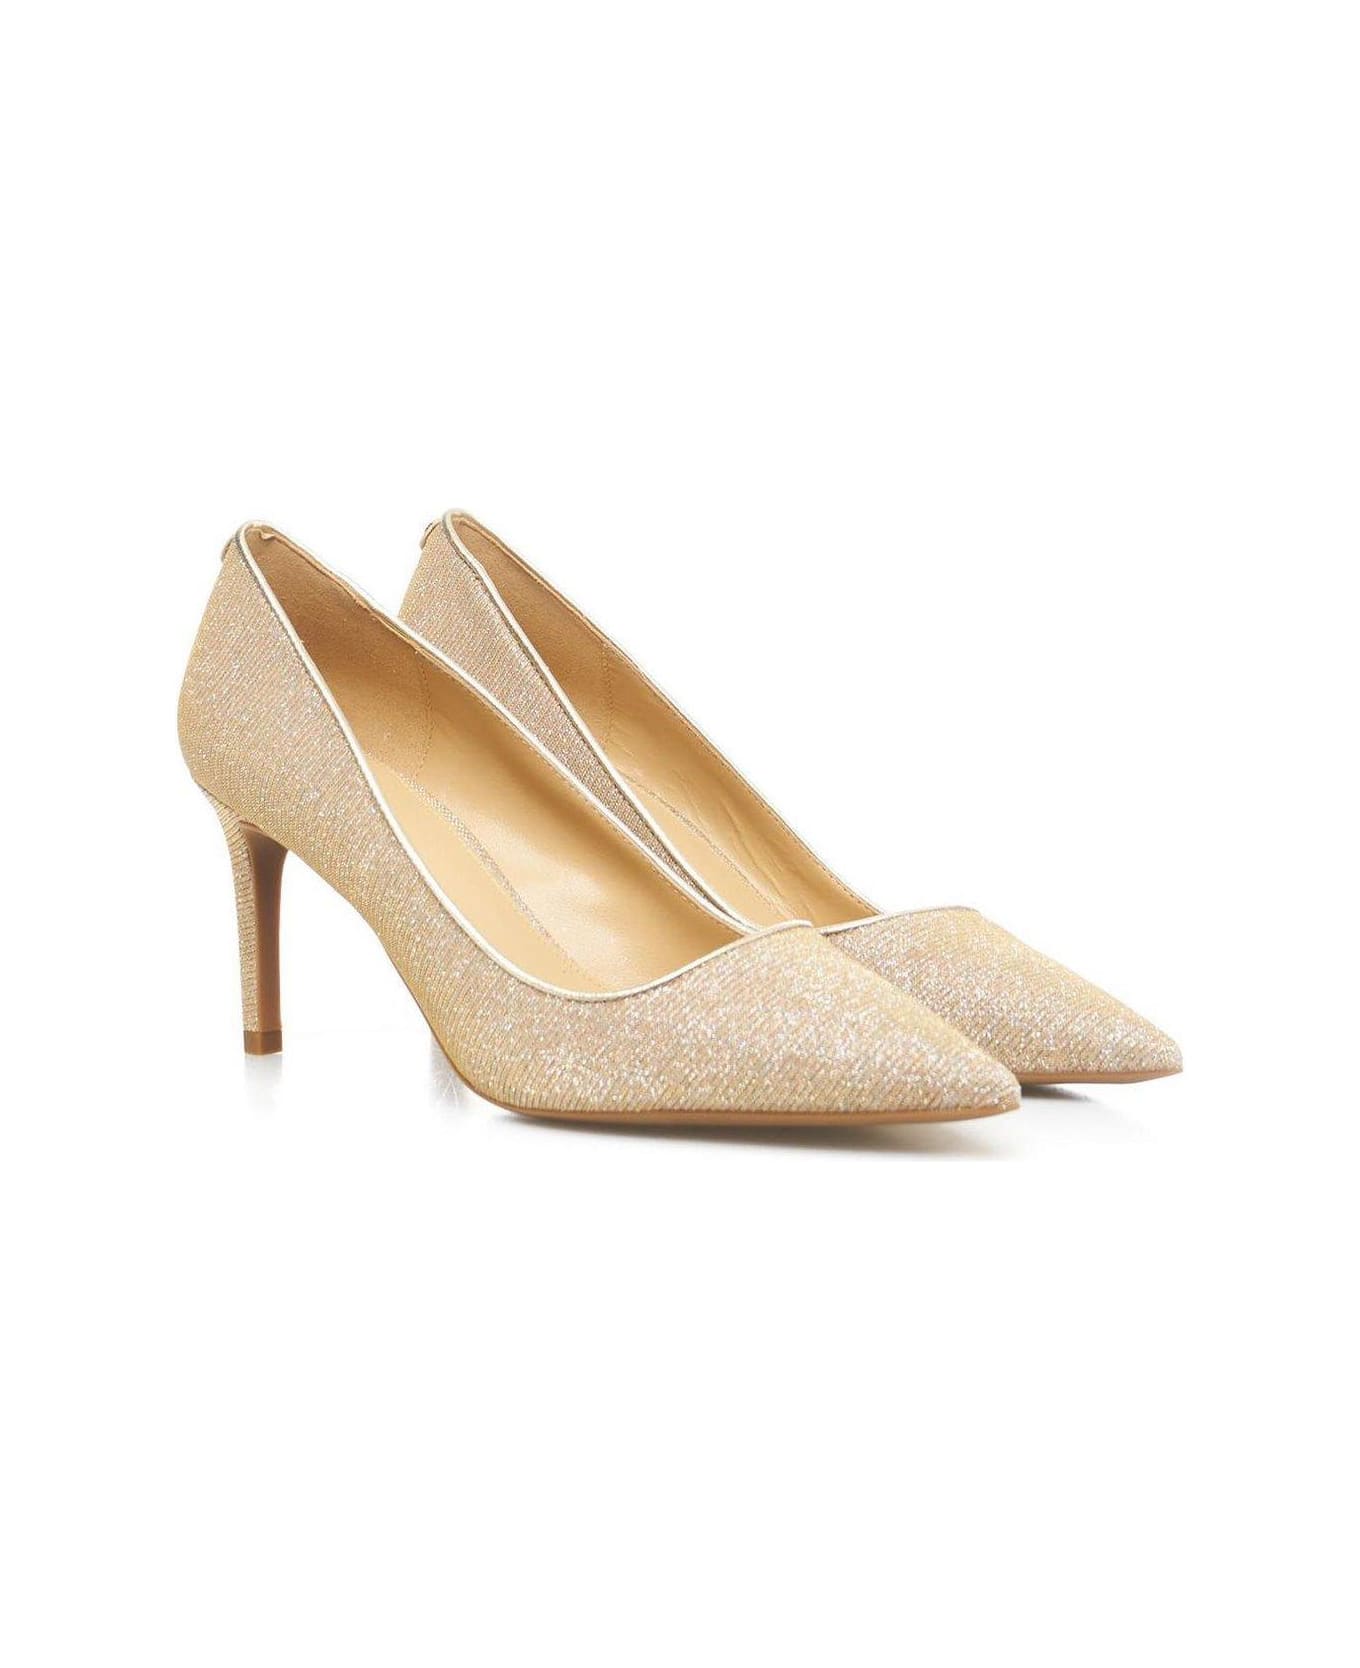 Michael Kors Collection Glittered Pointed Toe Pumps - Camel Multi